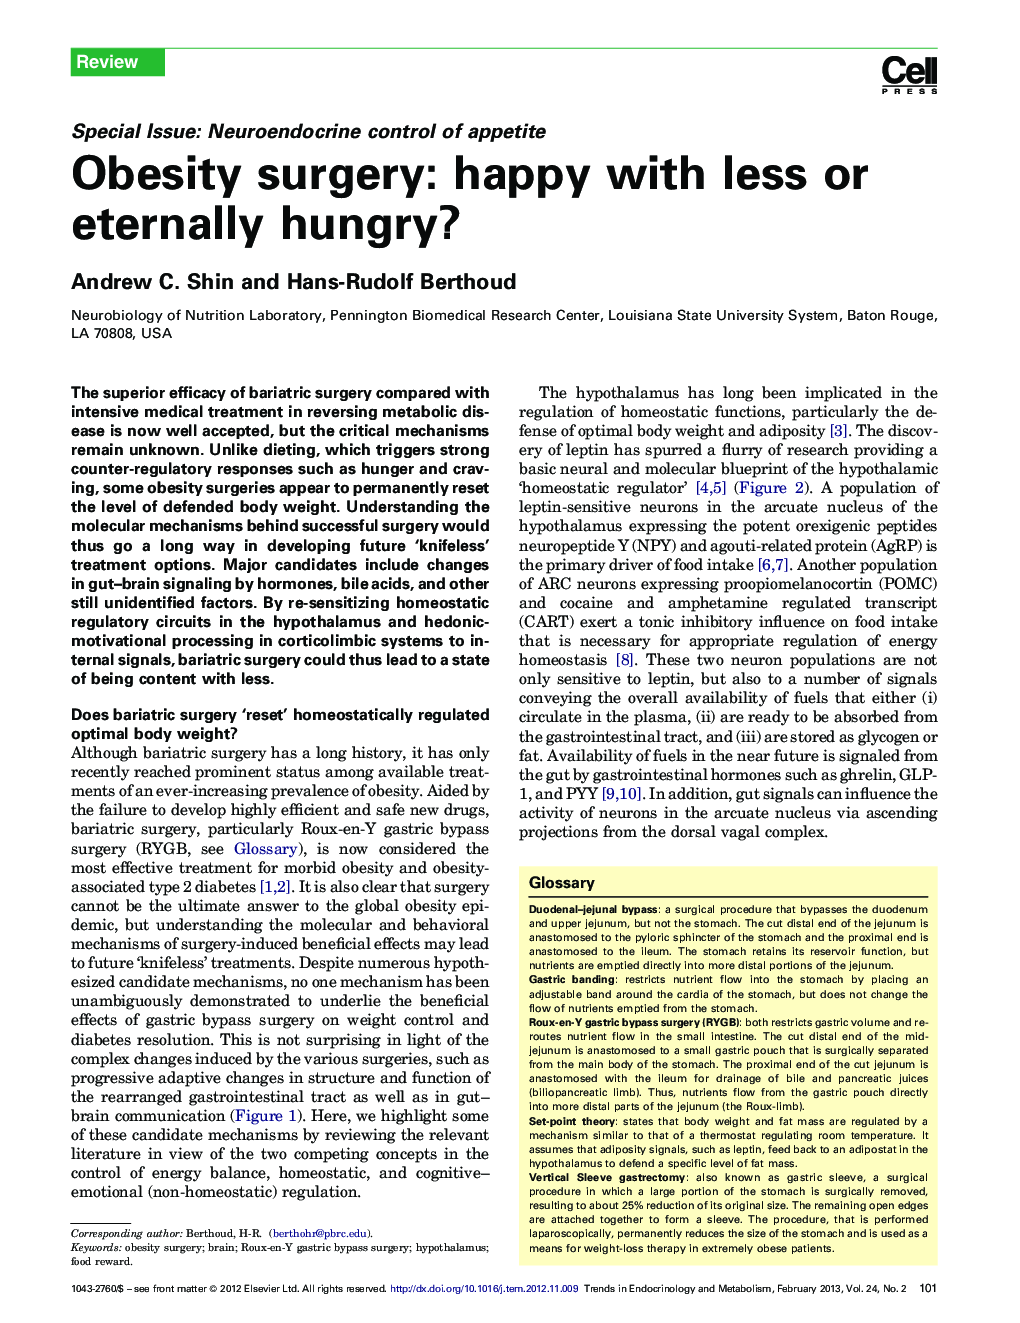 Obesity surgery: happy with less or eternally hungry?